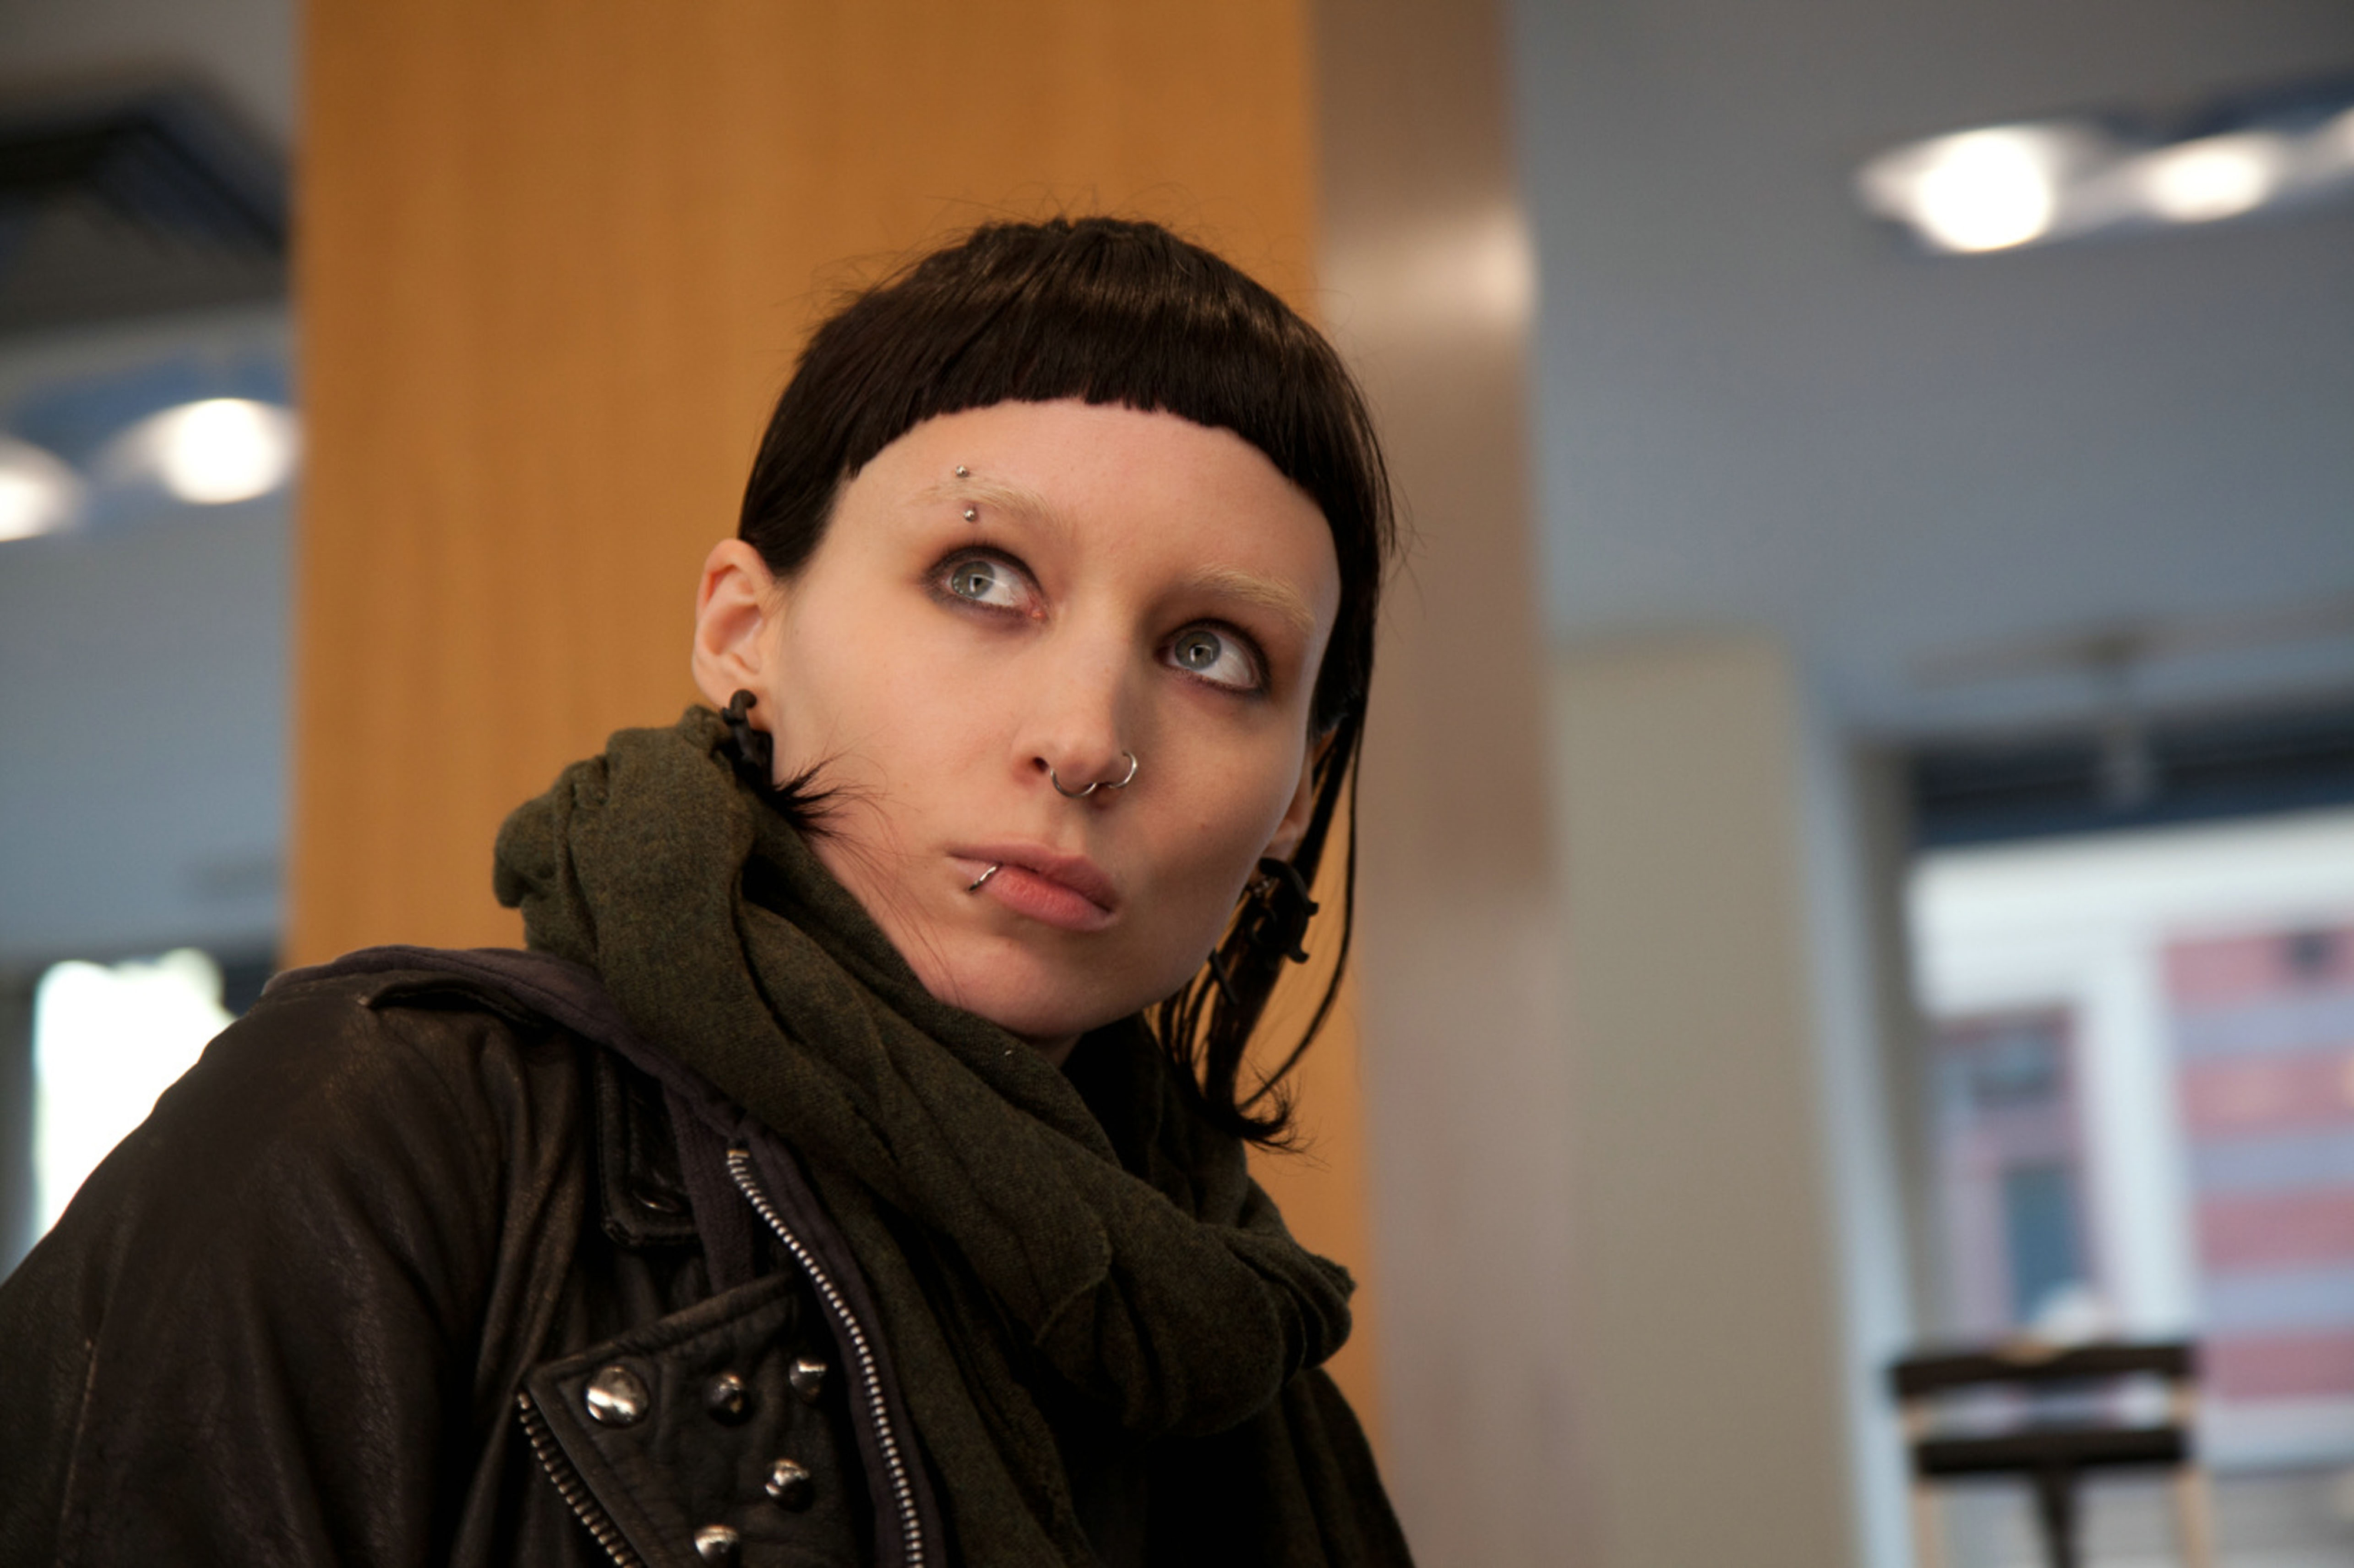 Rooney Mara sports facial piercings and dark hair in “The Girl with the Dragon Tattoo”